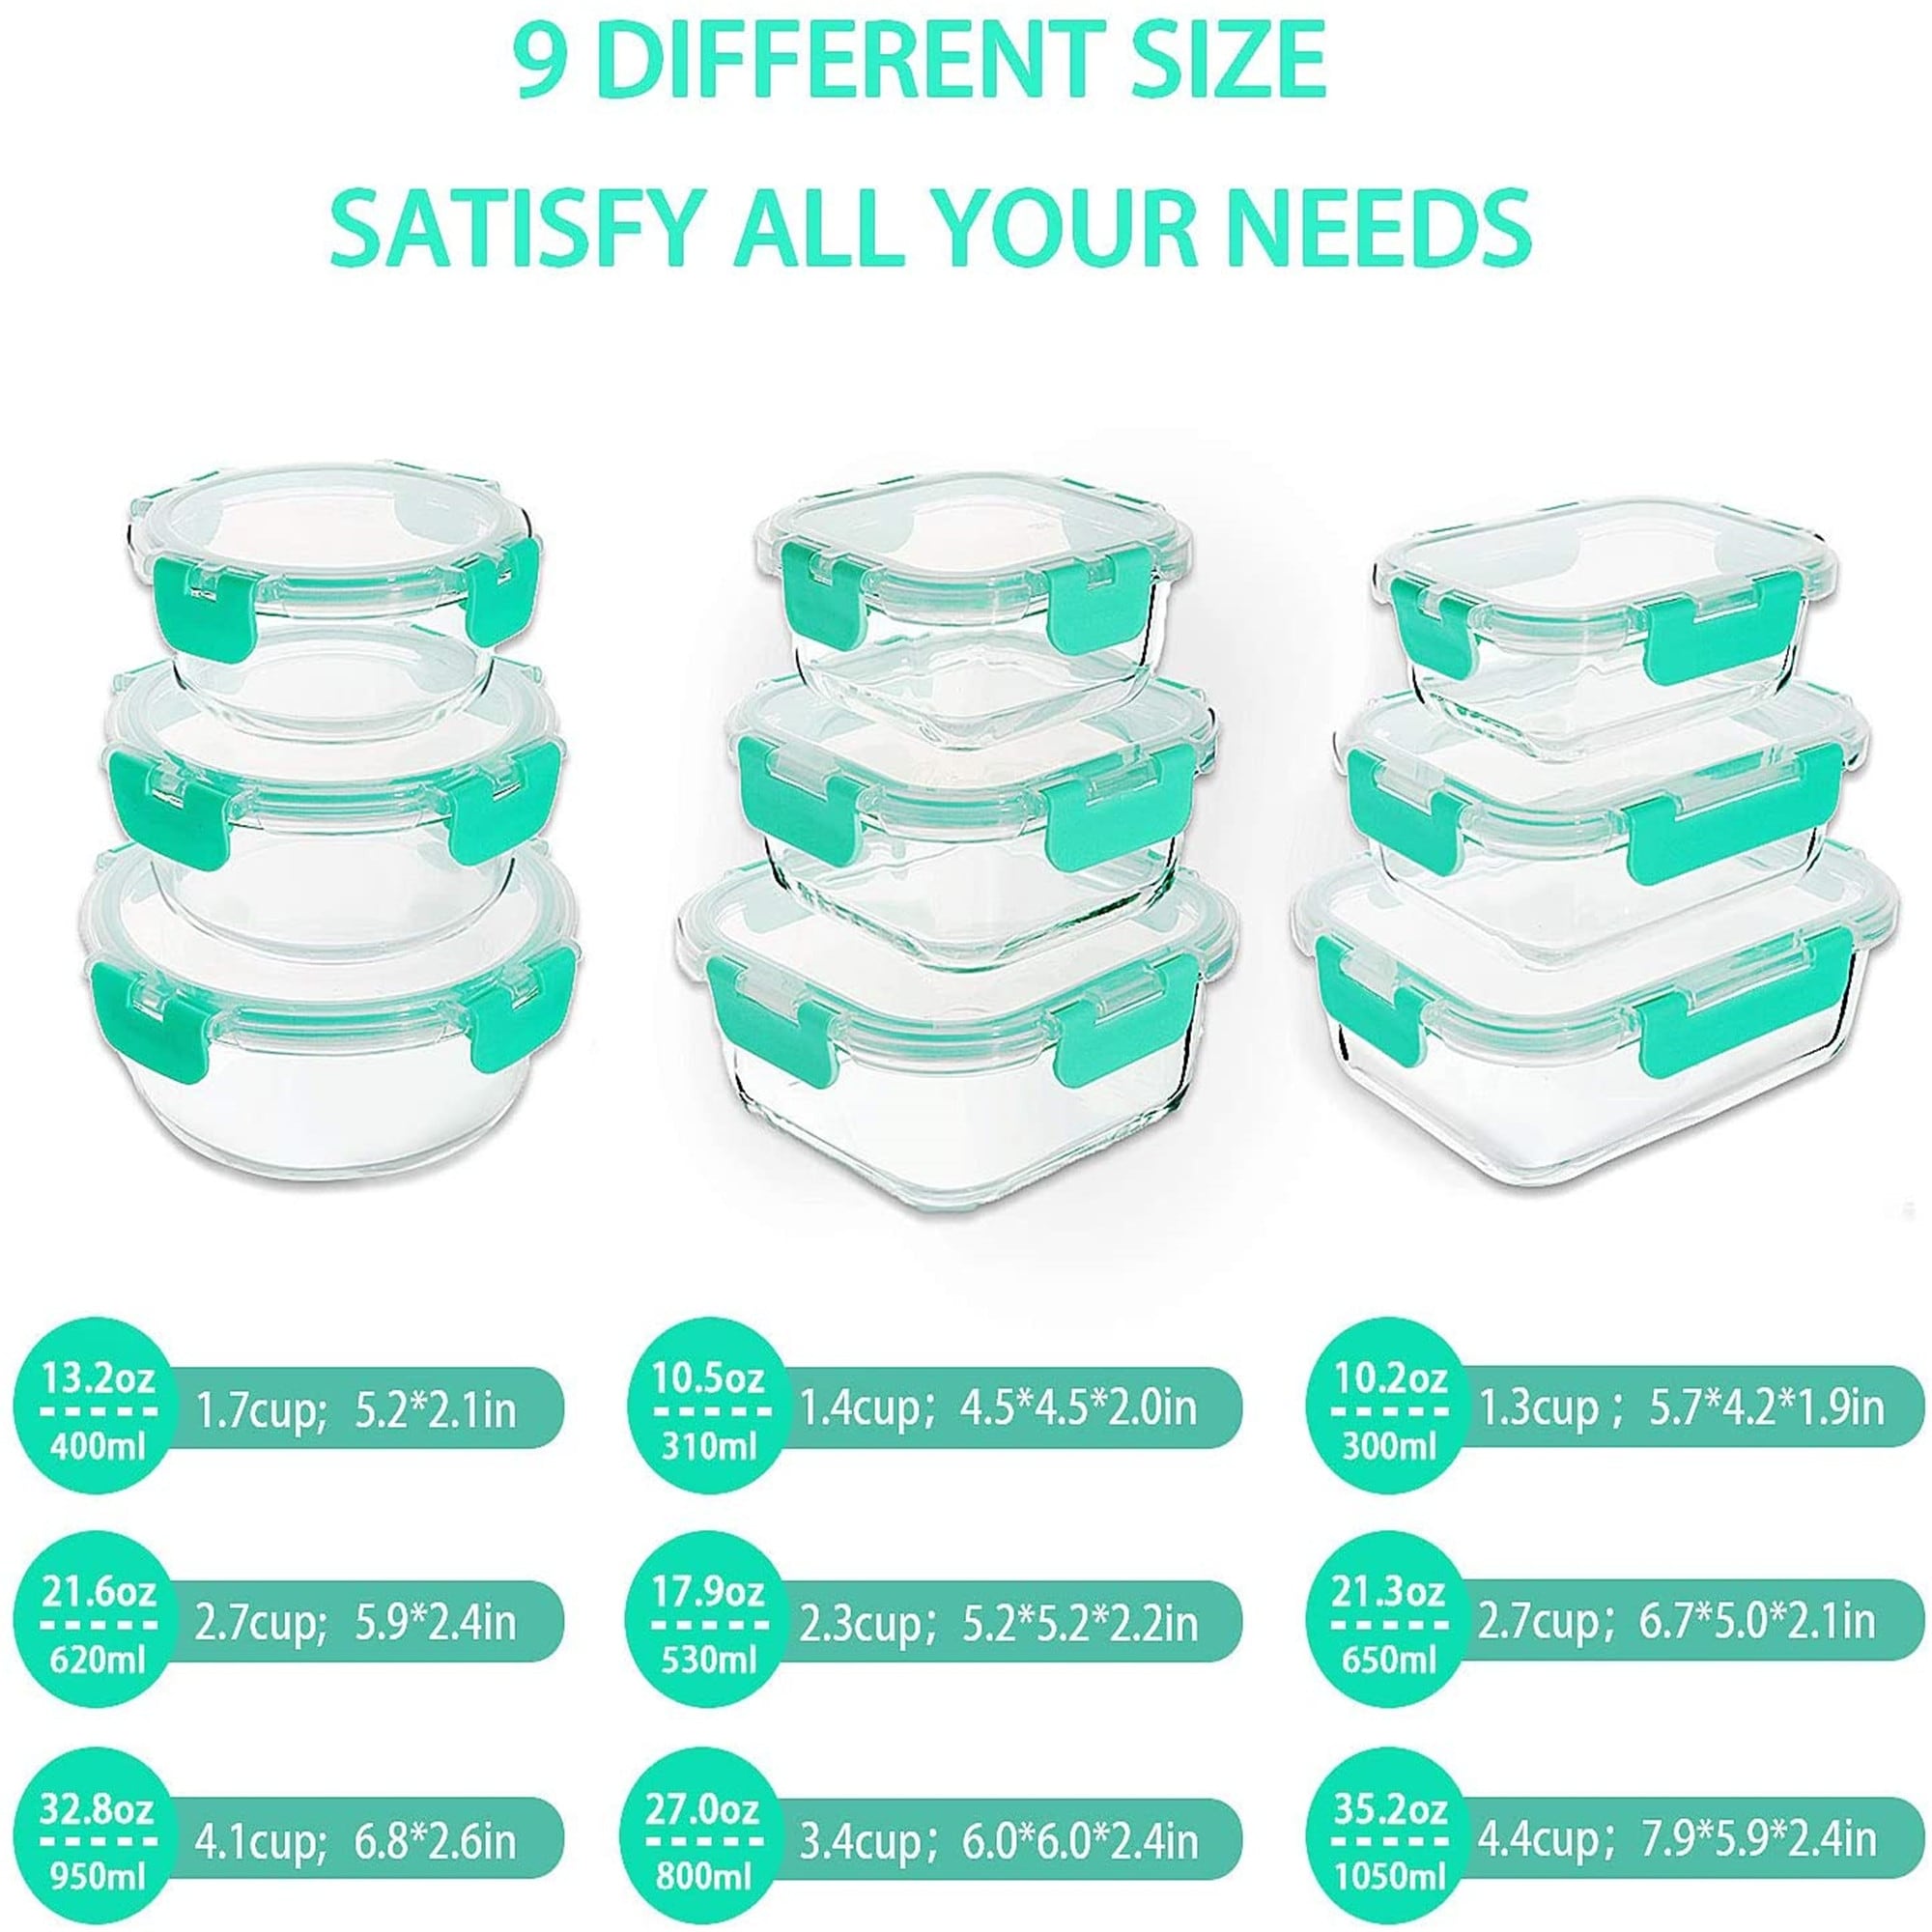 S SALIENT 18 Piece Glass Food Storage Containers with Lids, Meal Prep  Containers for Food Storage, BPA Free & Leak Proof (9 lids & 9 Containers)